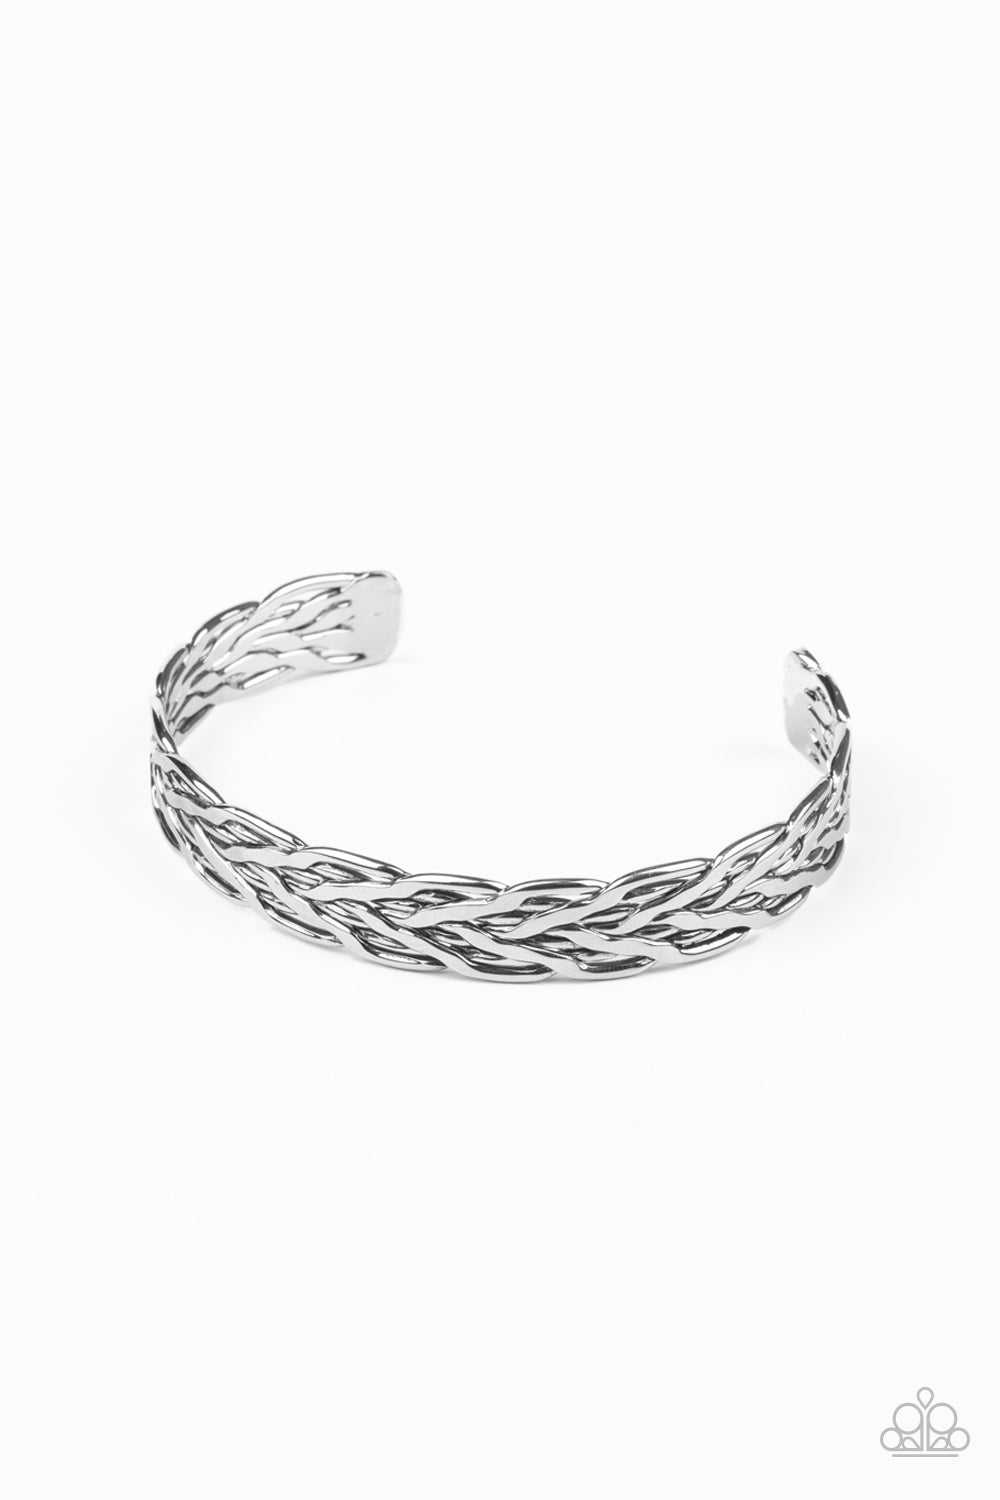 An edgy cuff bracelet with thin soft braids that fit across the wrist. Gorgeous!